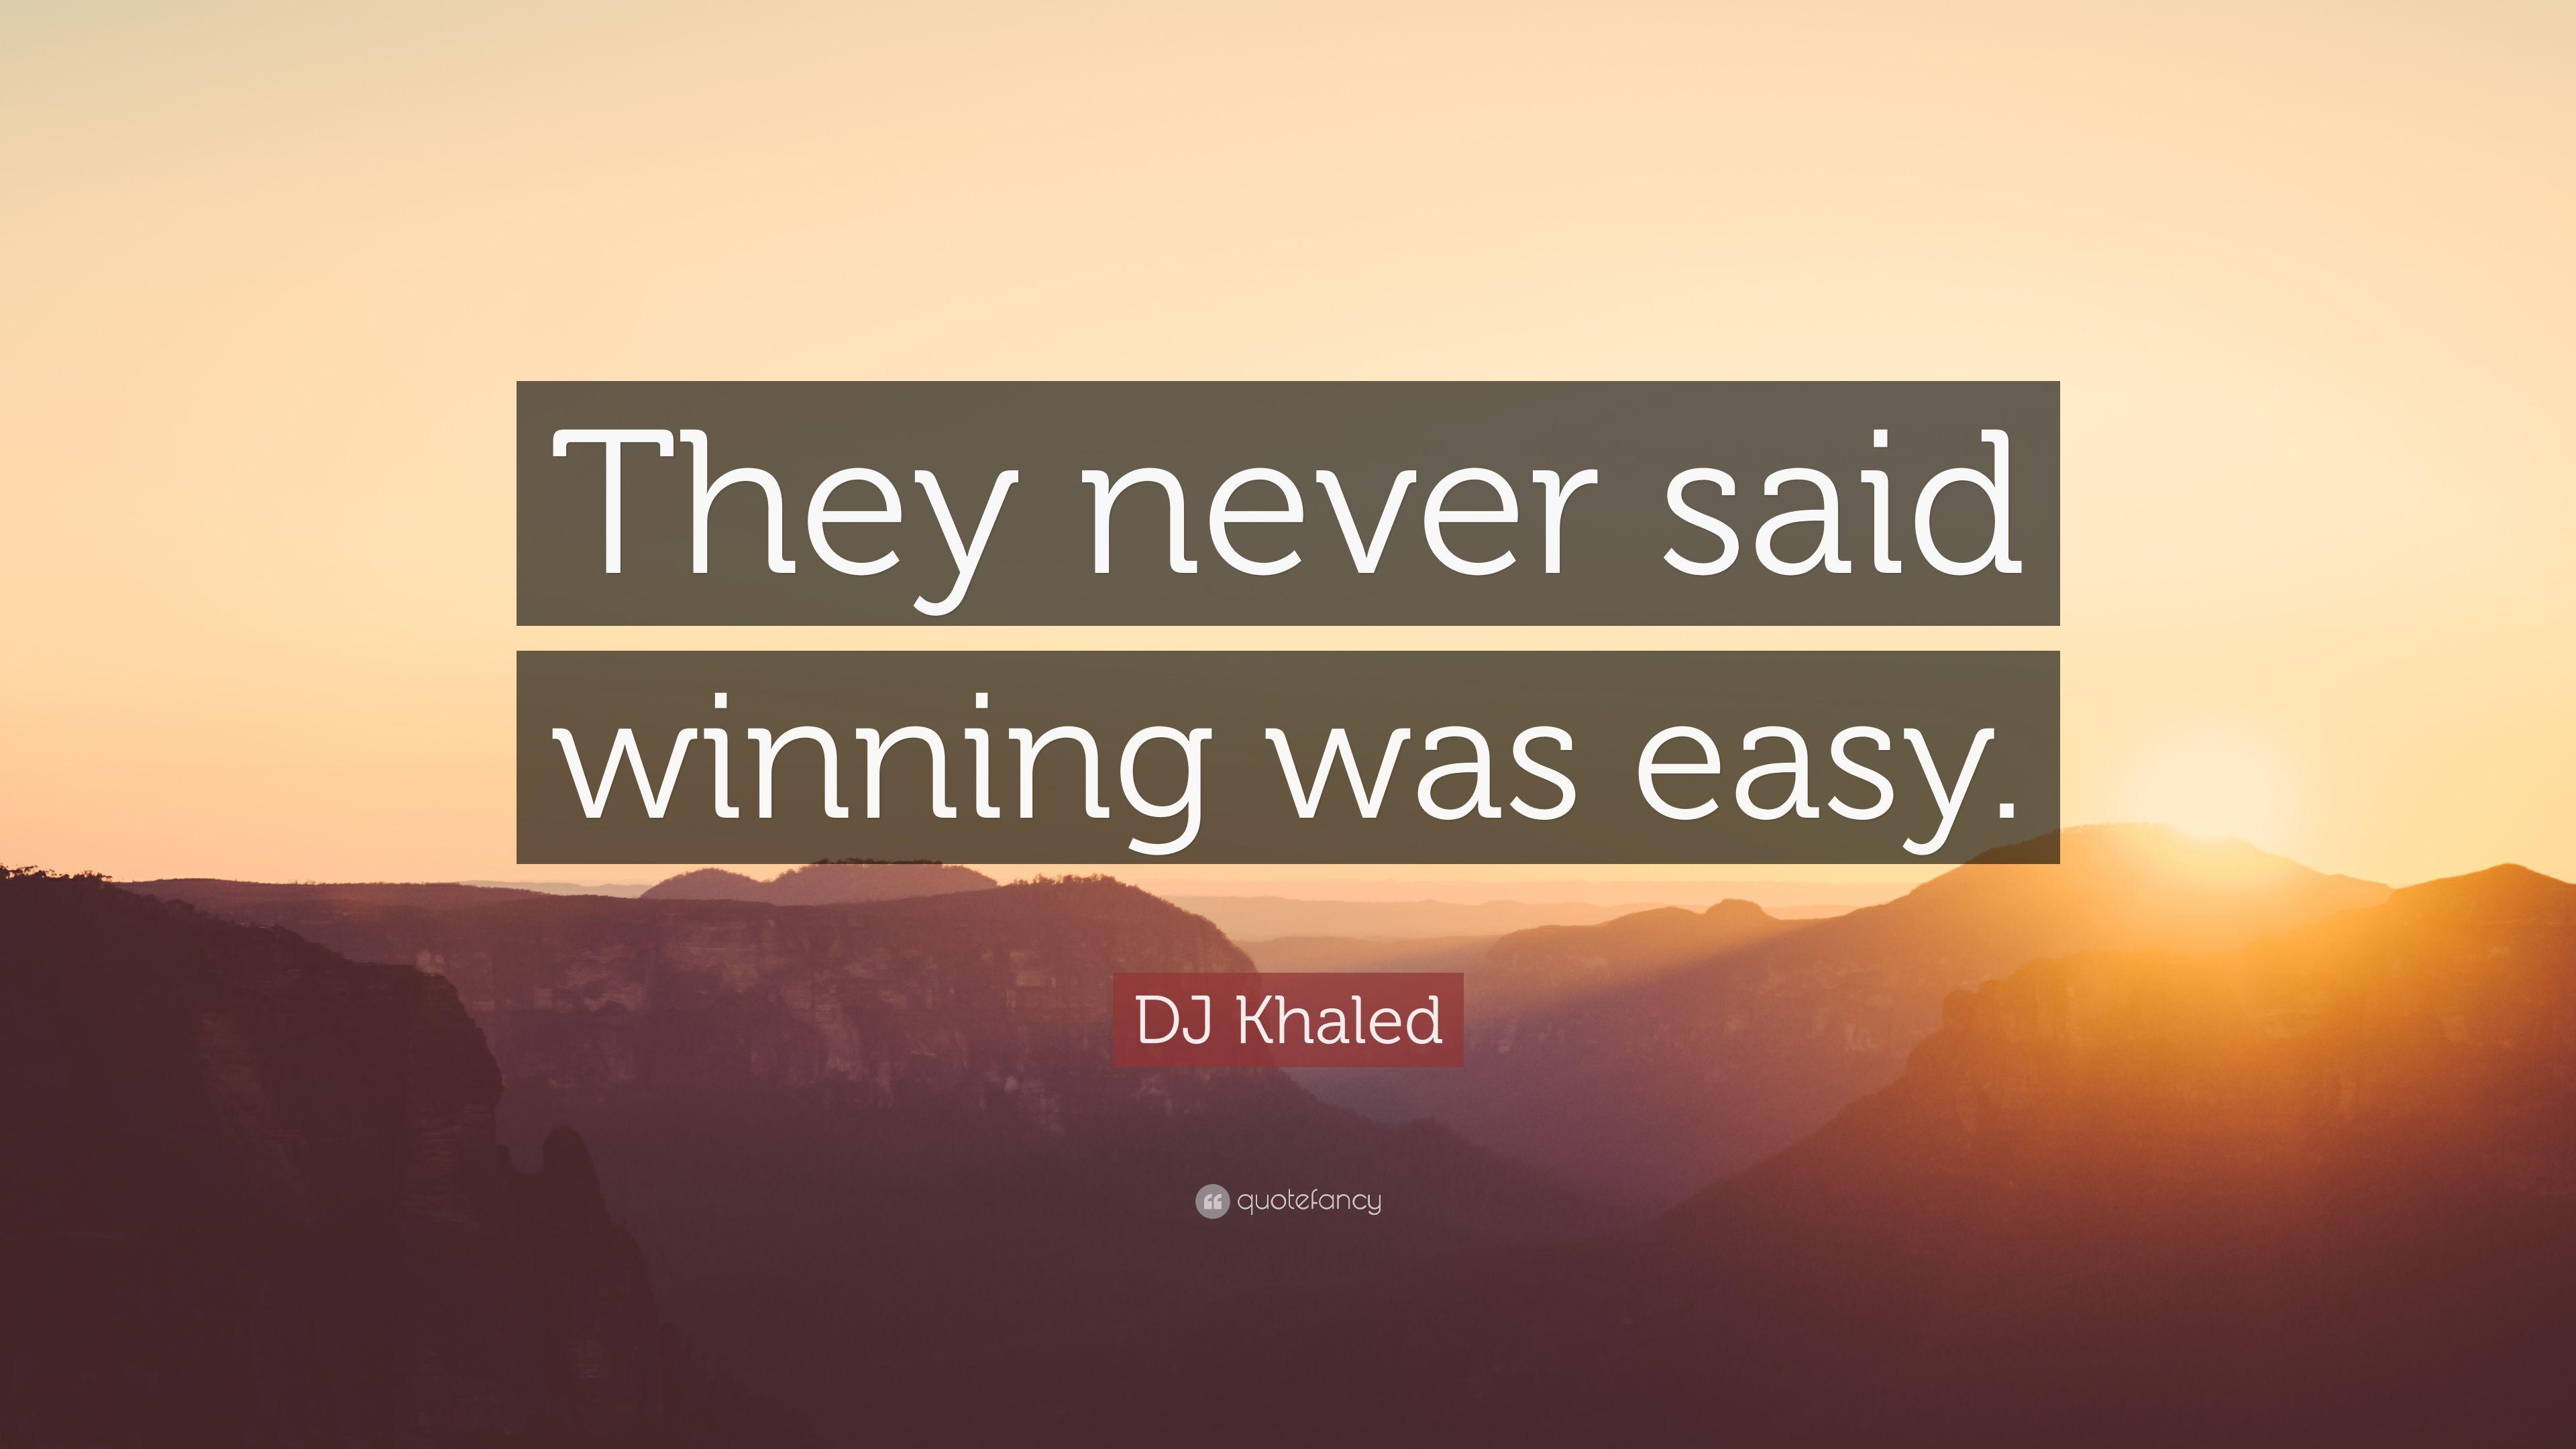 DJ Khaled Quote: “They never said winning was easy.” 20 wallpaper